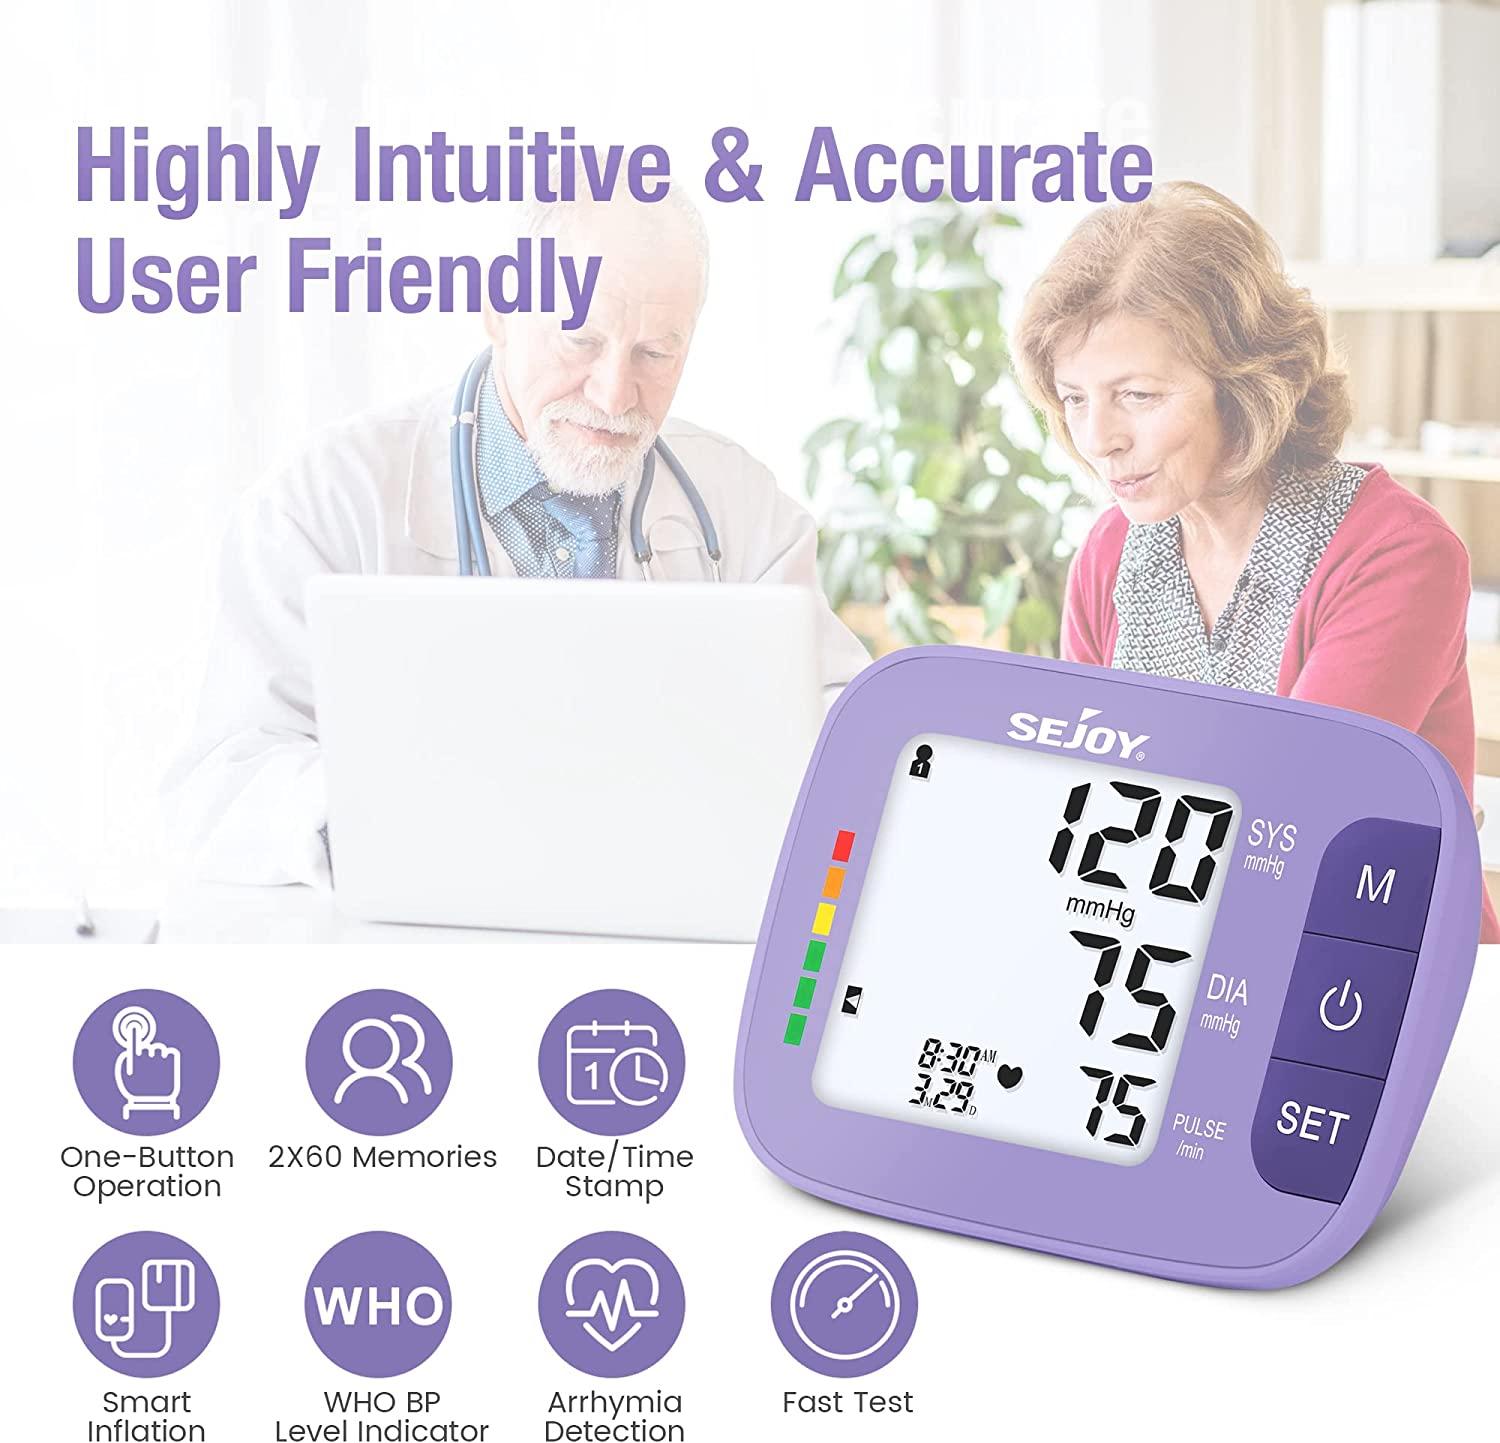 Sejoy Upper Arm Blood Pressure Monitor, Automatic Home Use BP Machine,  Heartbeat Rate Pulse Monitor, 120 Memory, XL Cuff